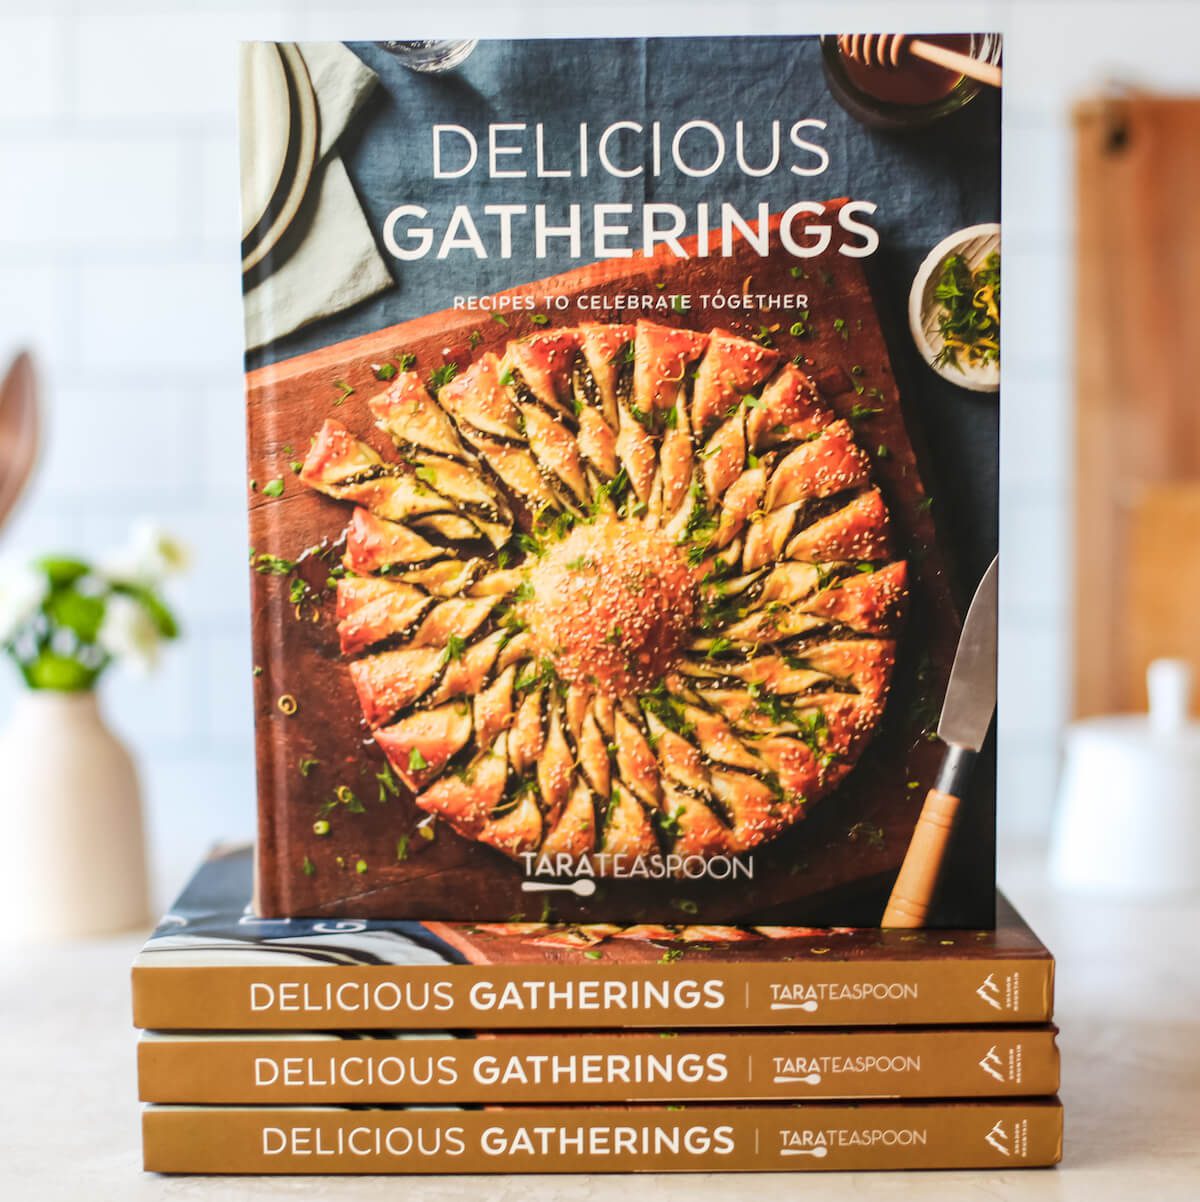 Stack of Delicious Gatherings books.